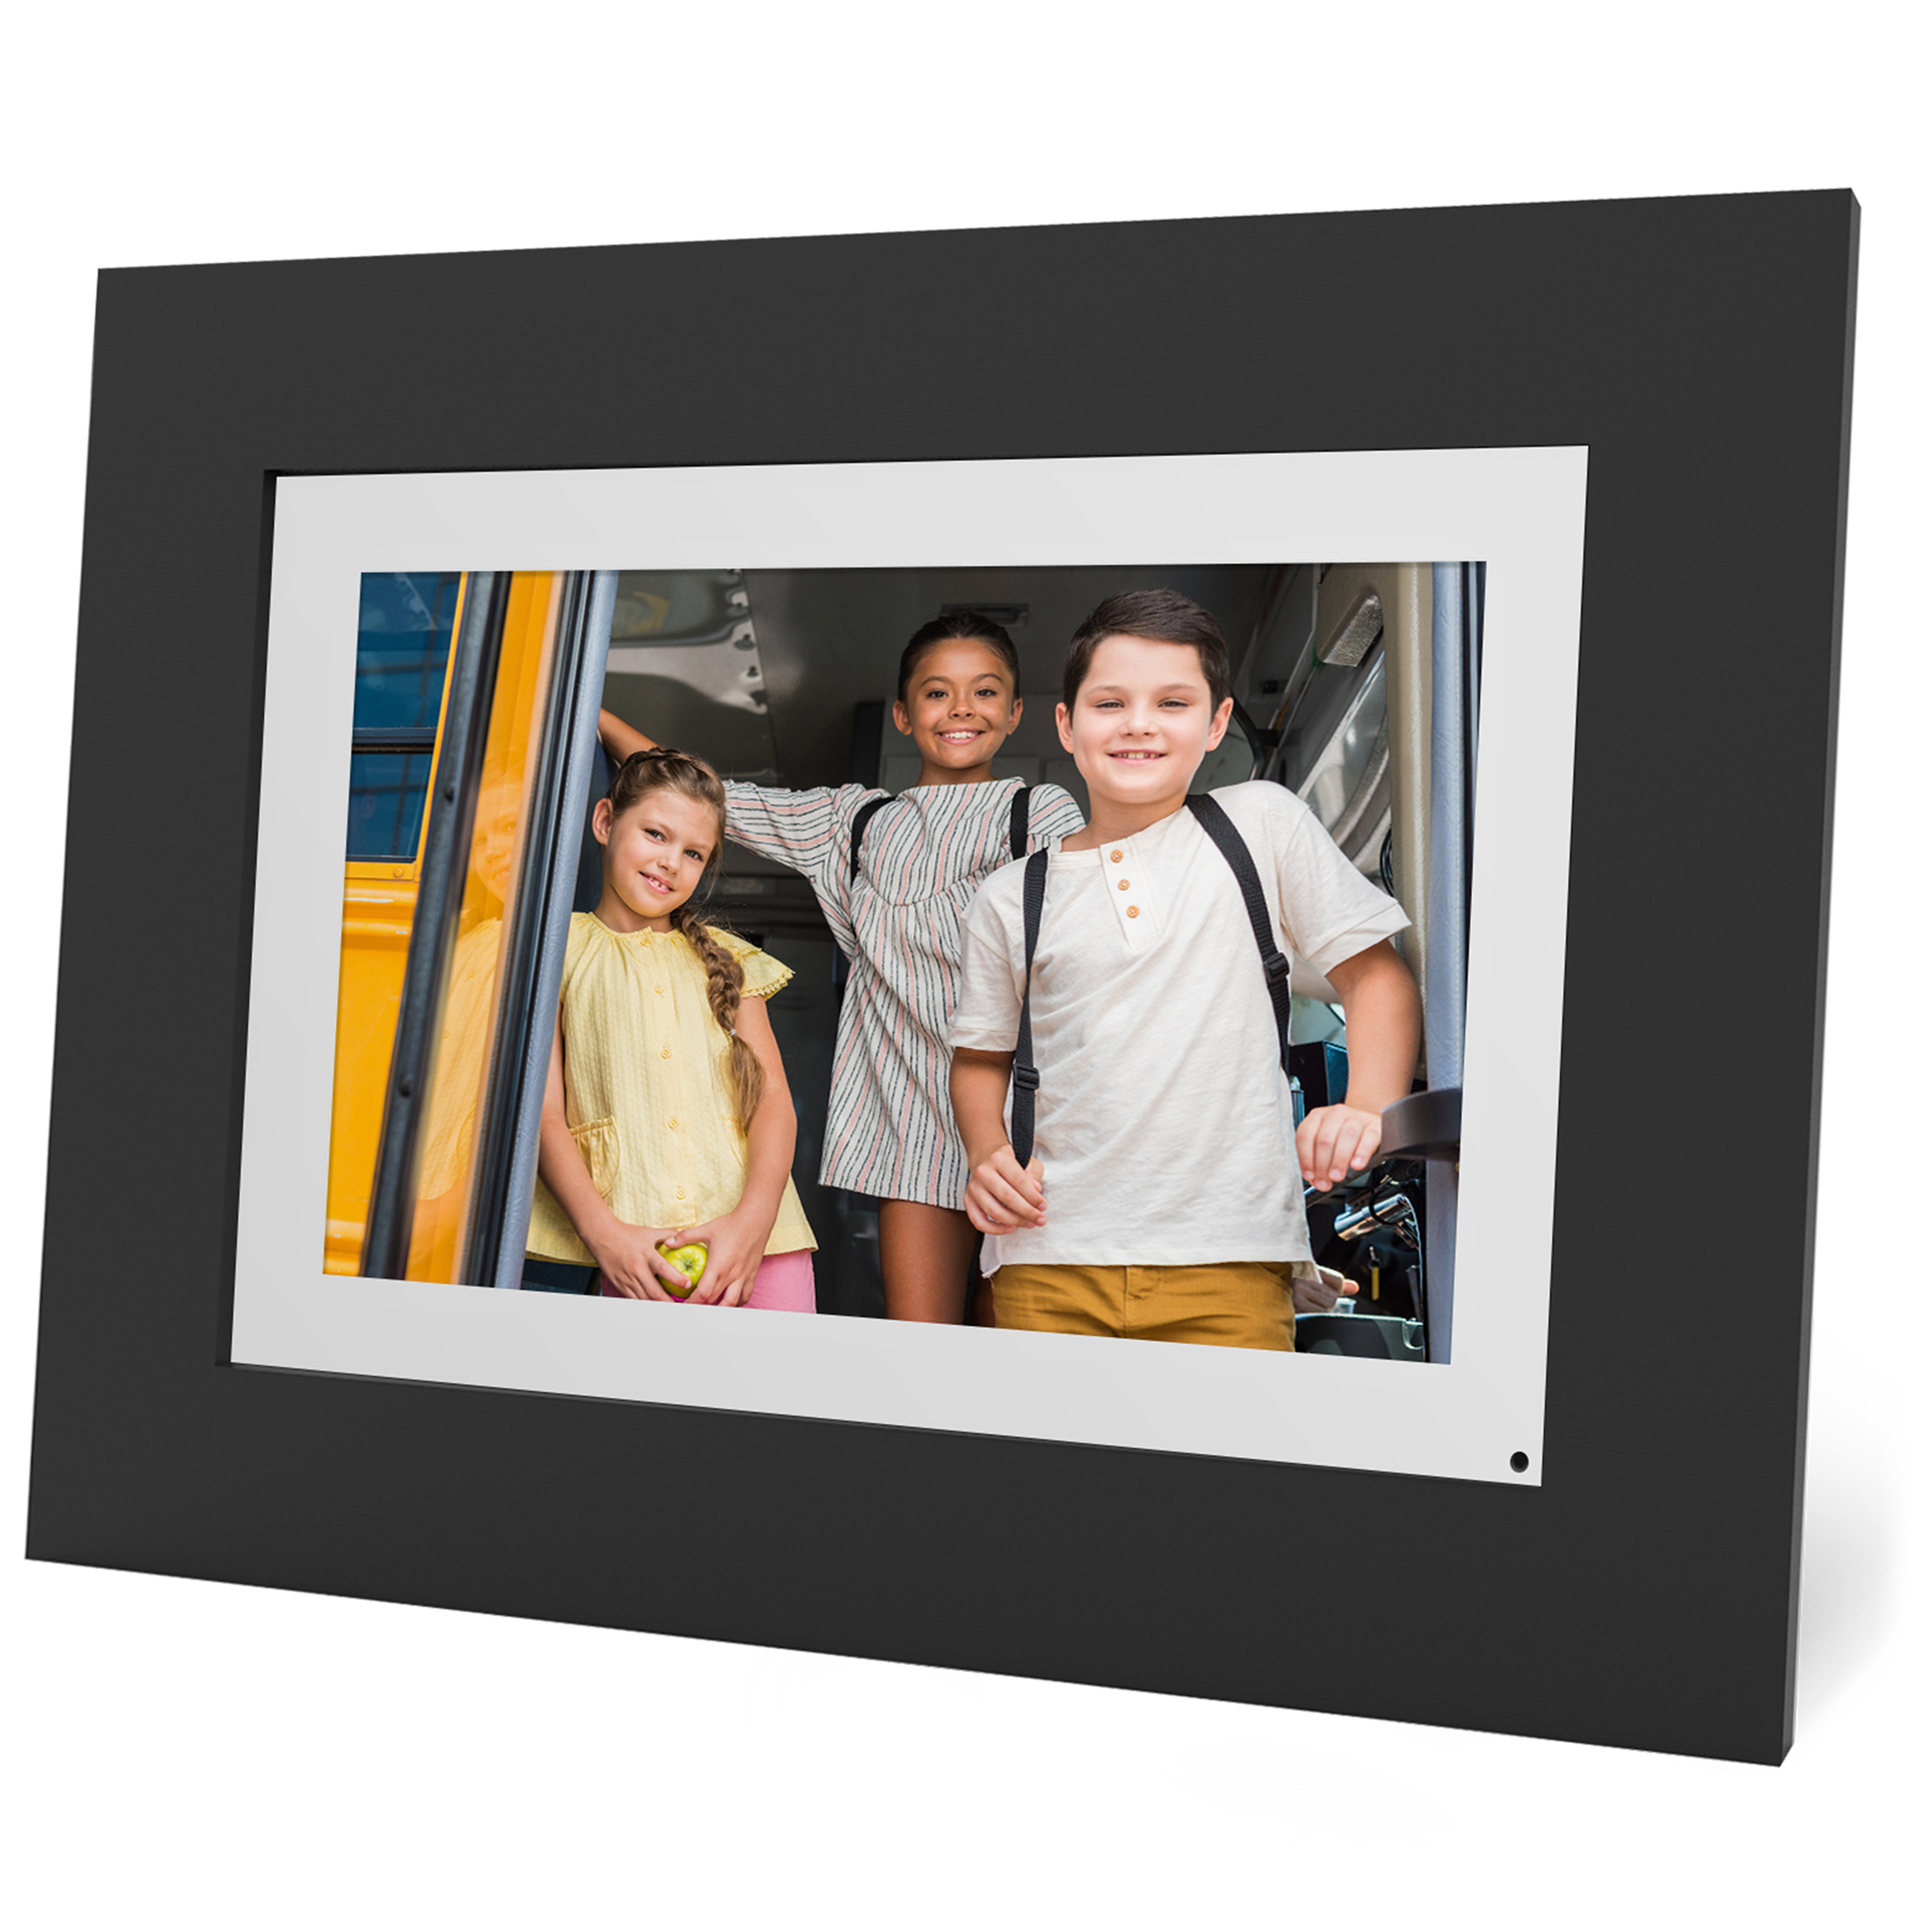 Simplysmart Home Friends And Family 10.1” Wi-Fi Smart Digital Picture Frame,  Send Pictures From Phone To Frame, Hd 1080P Touchscreen, 8Gb Internal  Memory